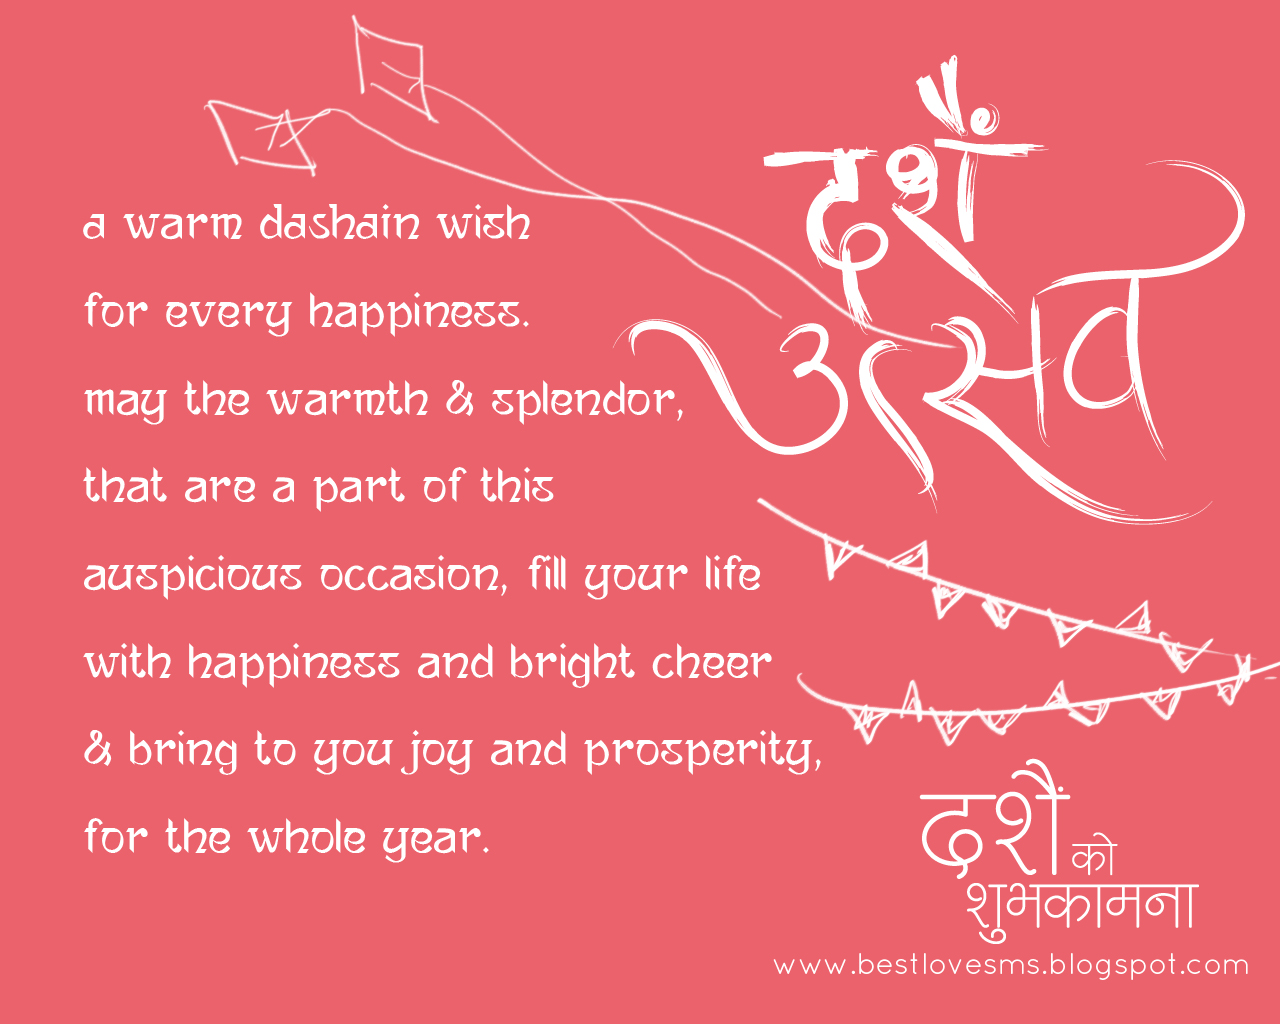 Click The Image To Enlarge For Text Version Of New Dashain Sms